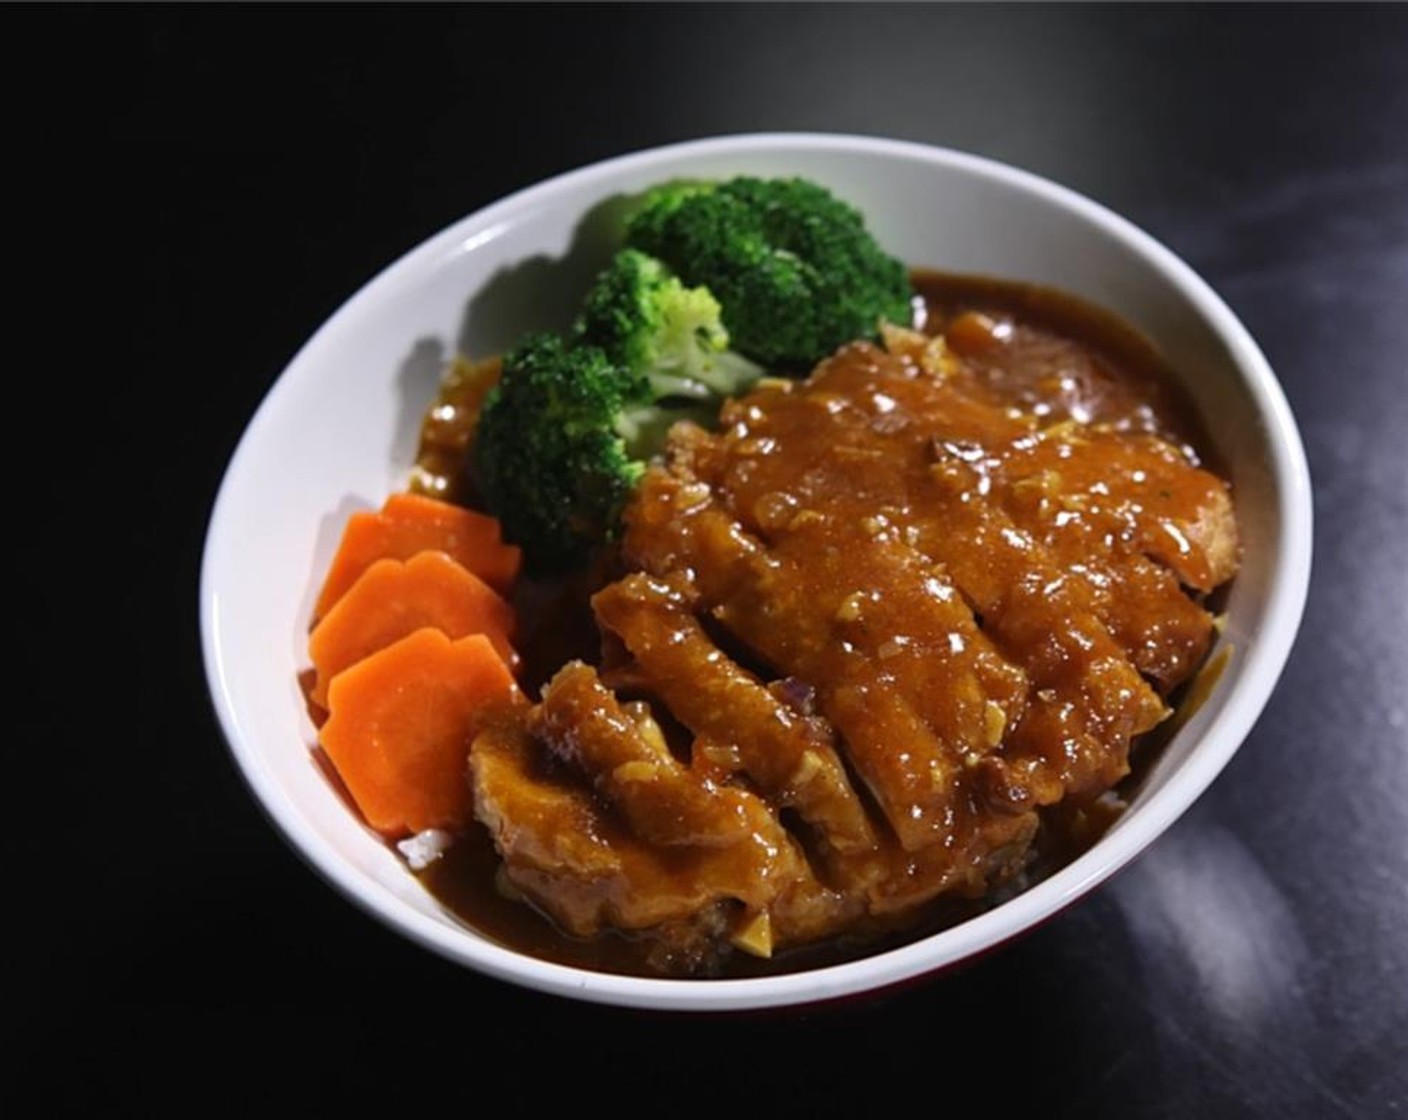 step 9 Serve your Malaysian Fried Chicken in a bowl with White Rice (to taste), Broccoli Florets (to taste), Carrots (to taste), and plenty of sauce. Enjoy!